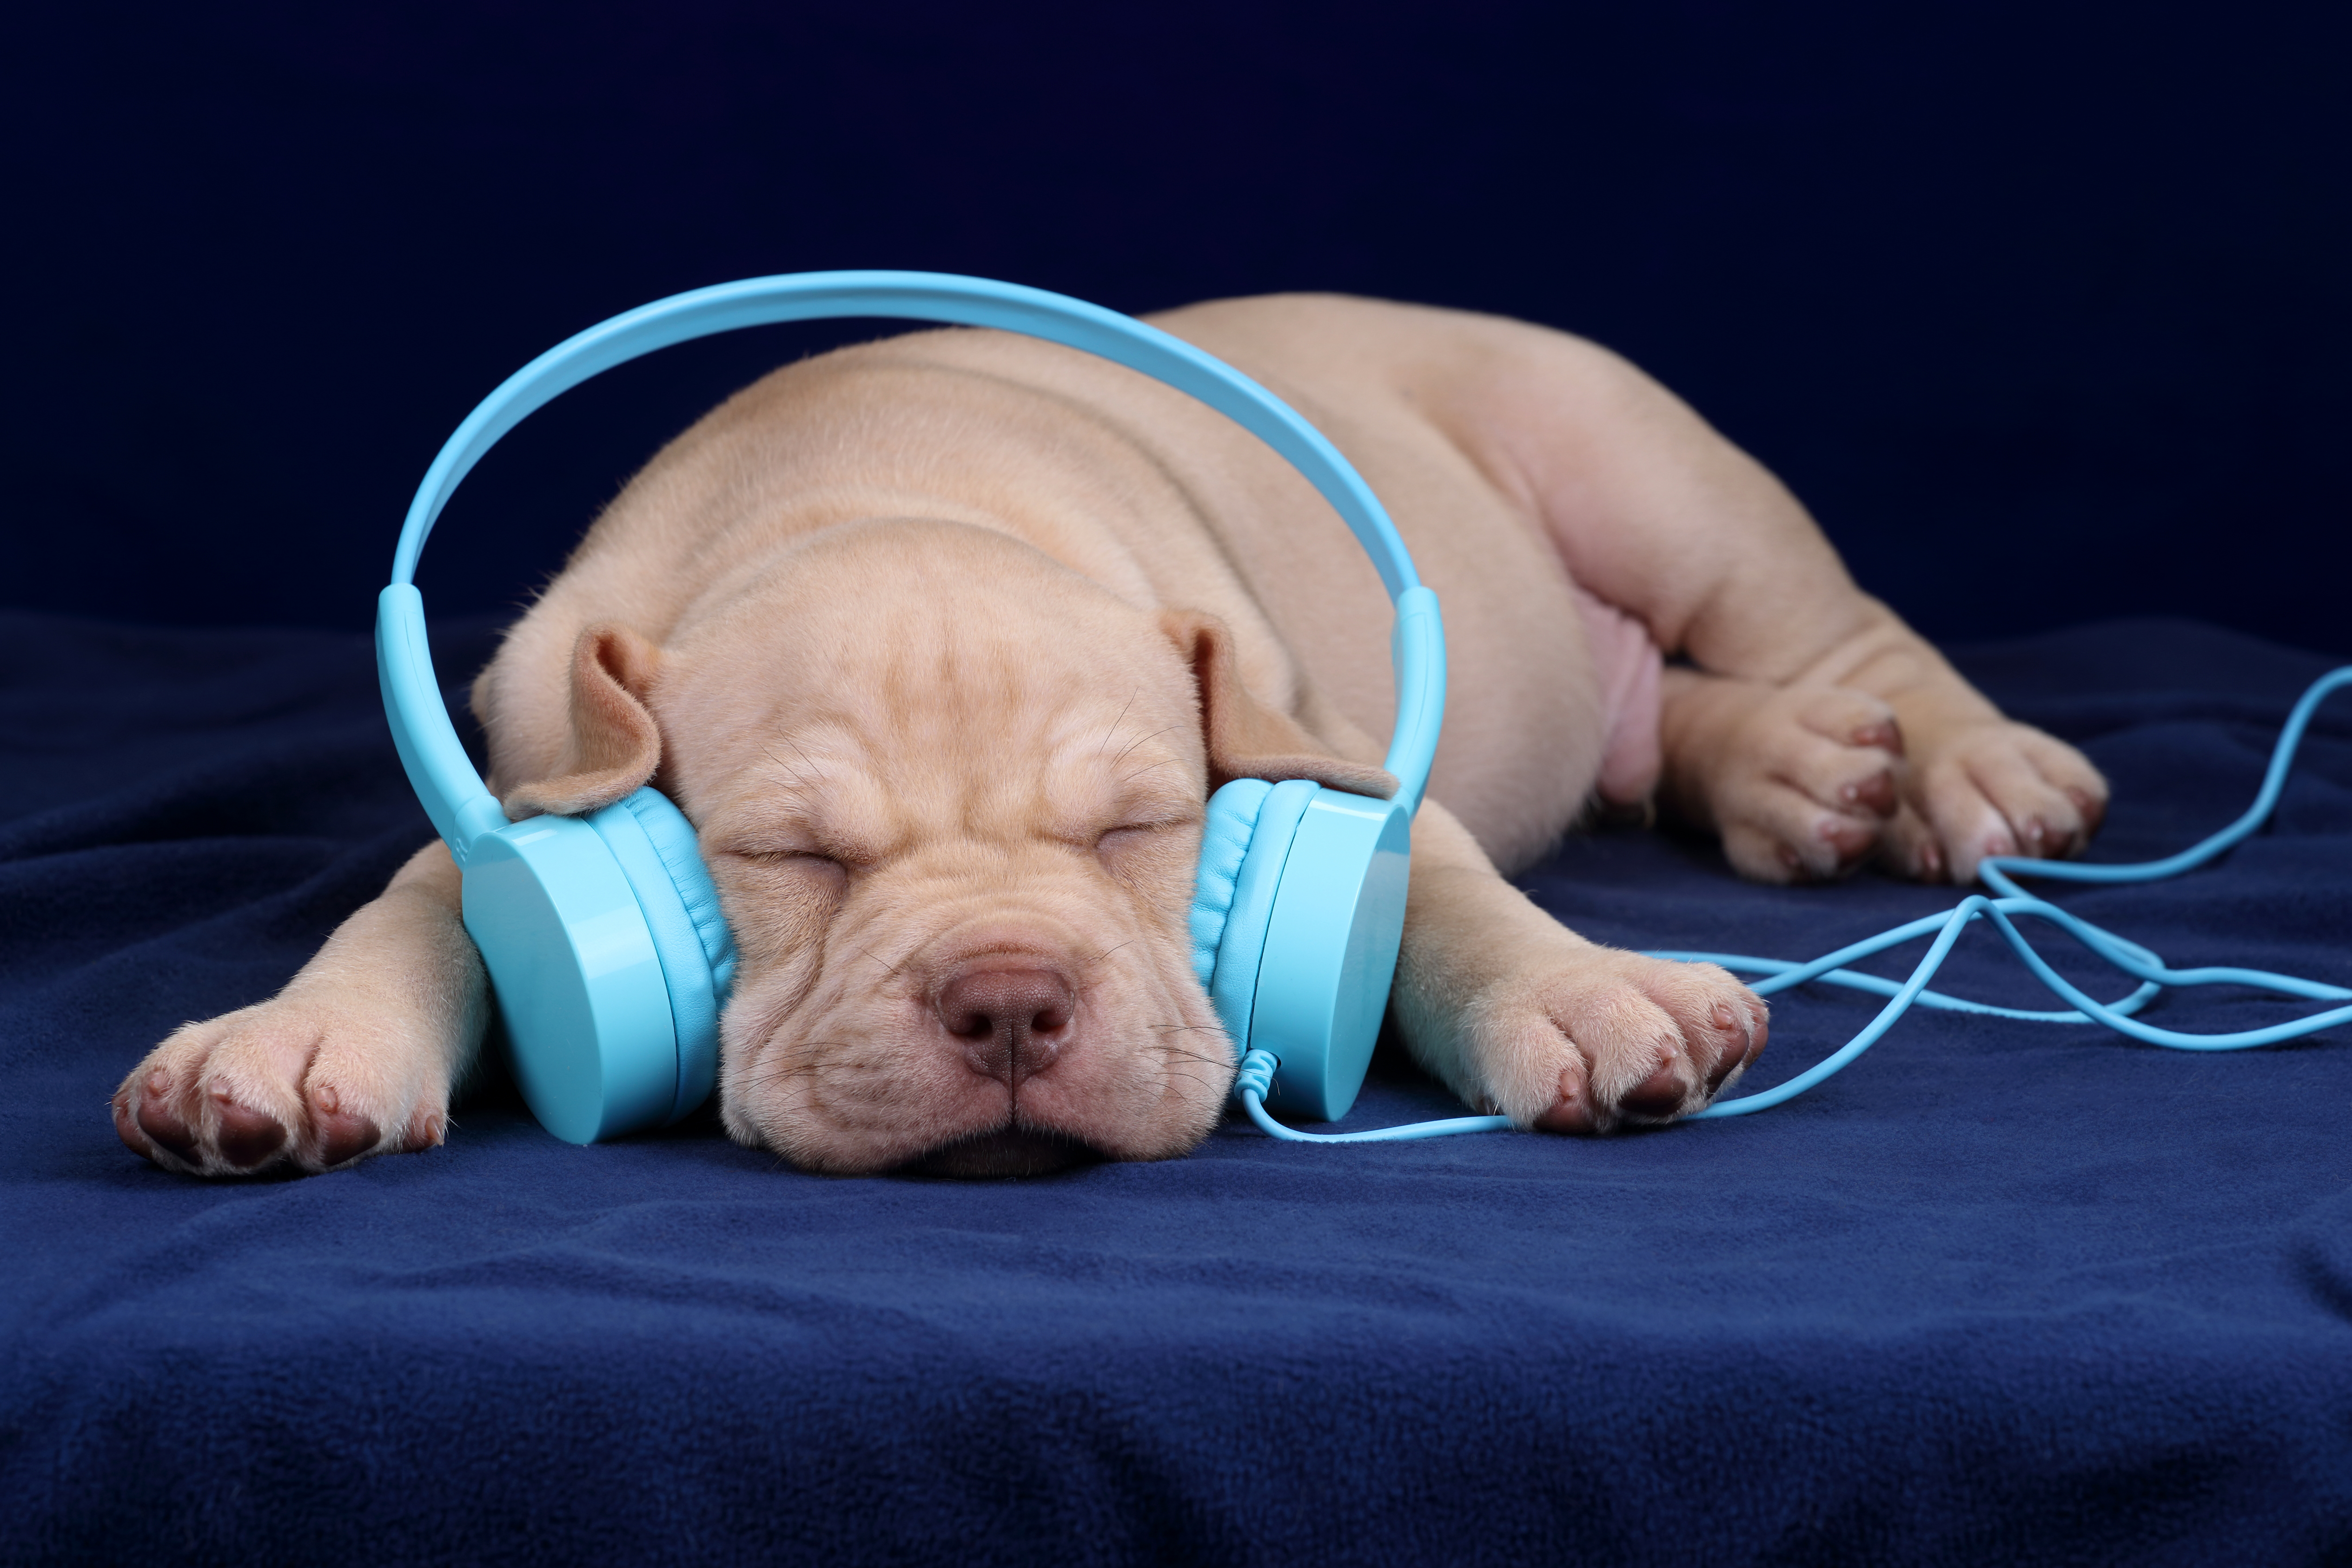 music for puppy